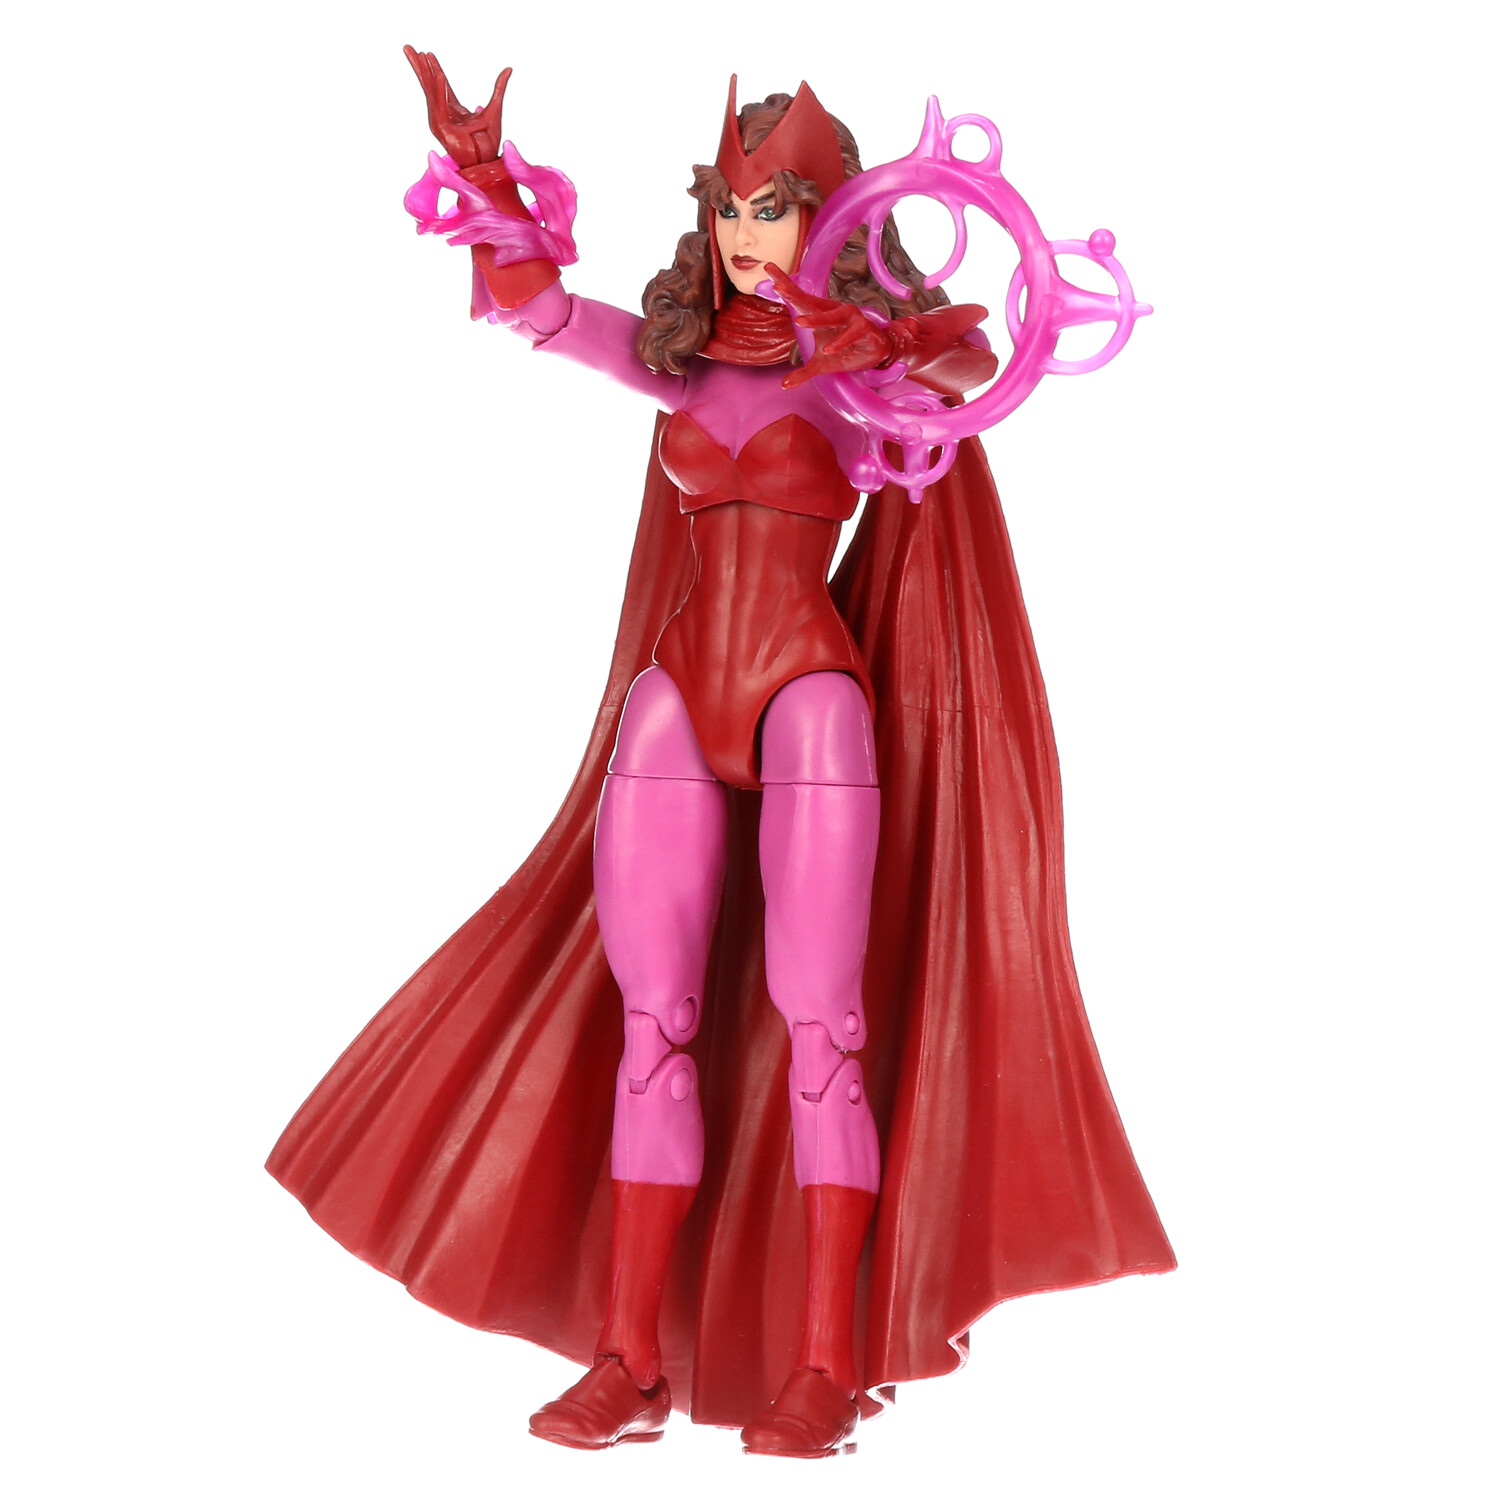 Avengers Hasbro Marvel Legends Series 6-inch Action Figure Toy Scarlet  Witch, Premium Design and 4 Accessories, for Kids Age 4 and Up